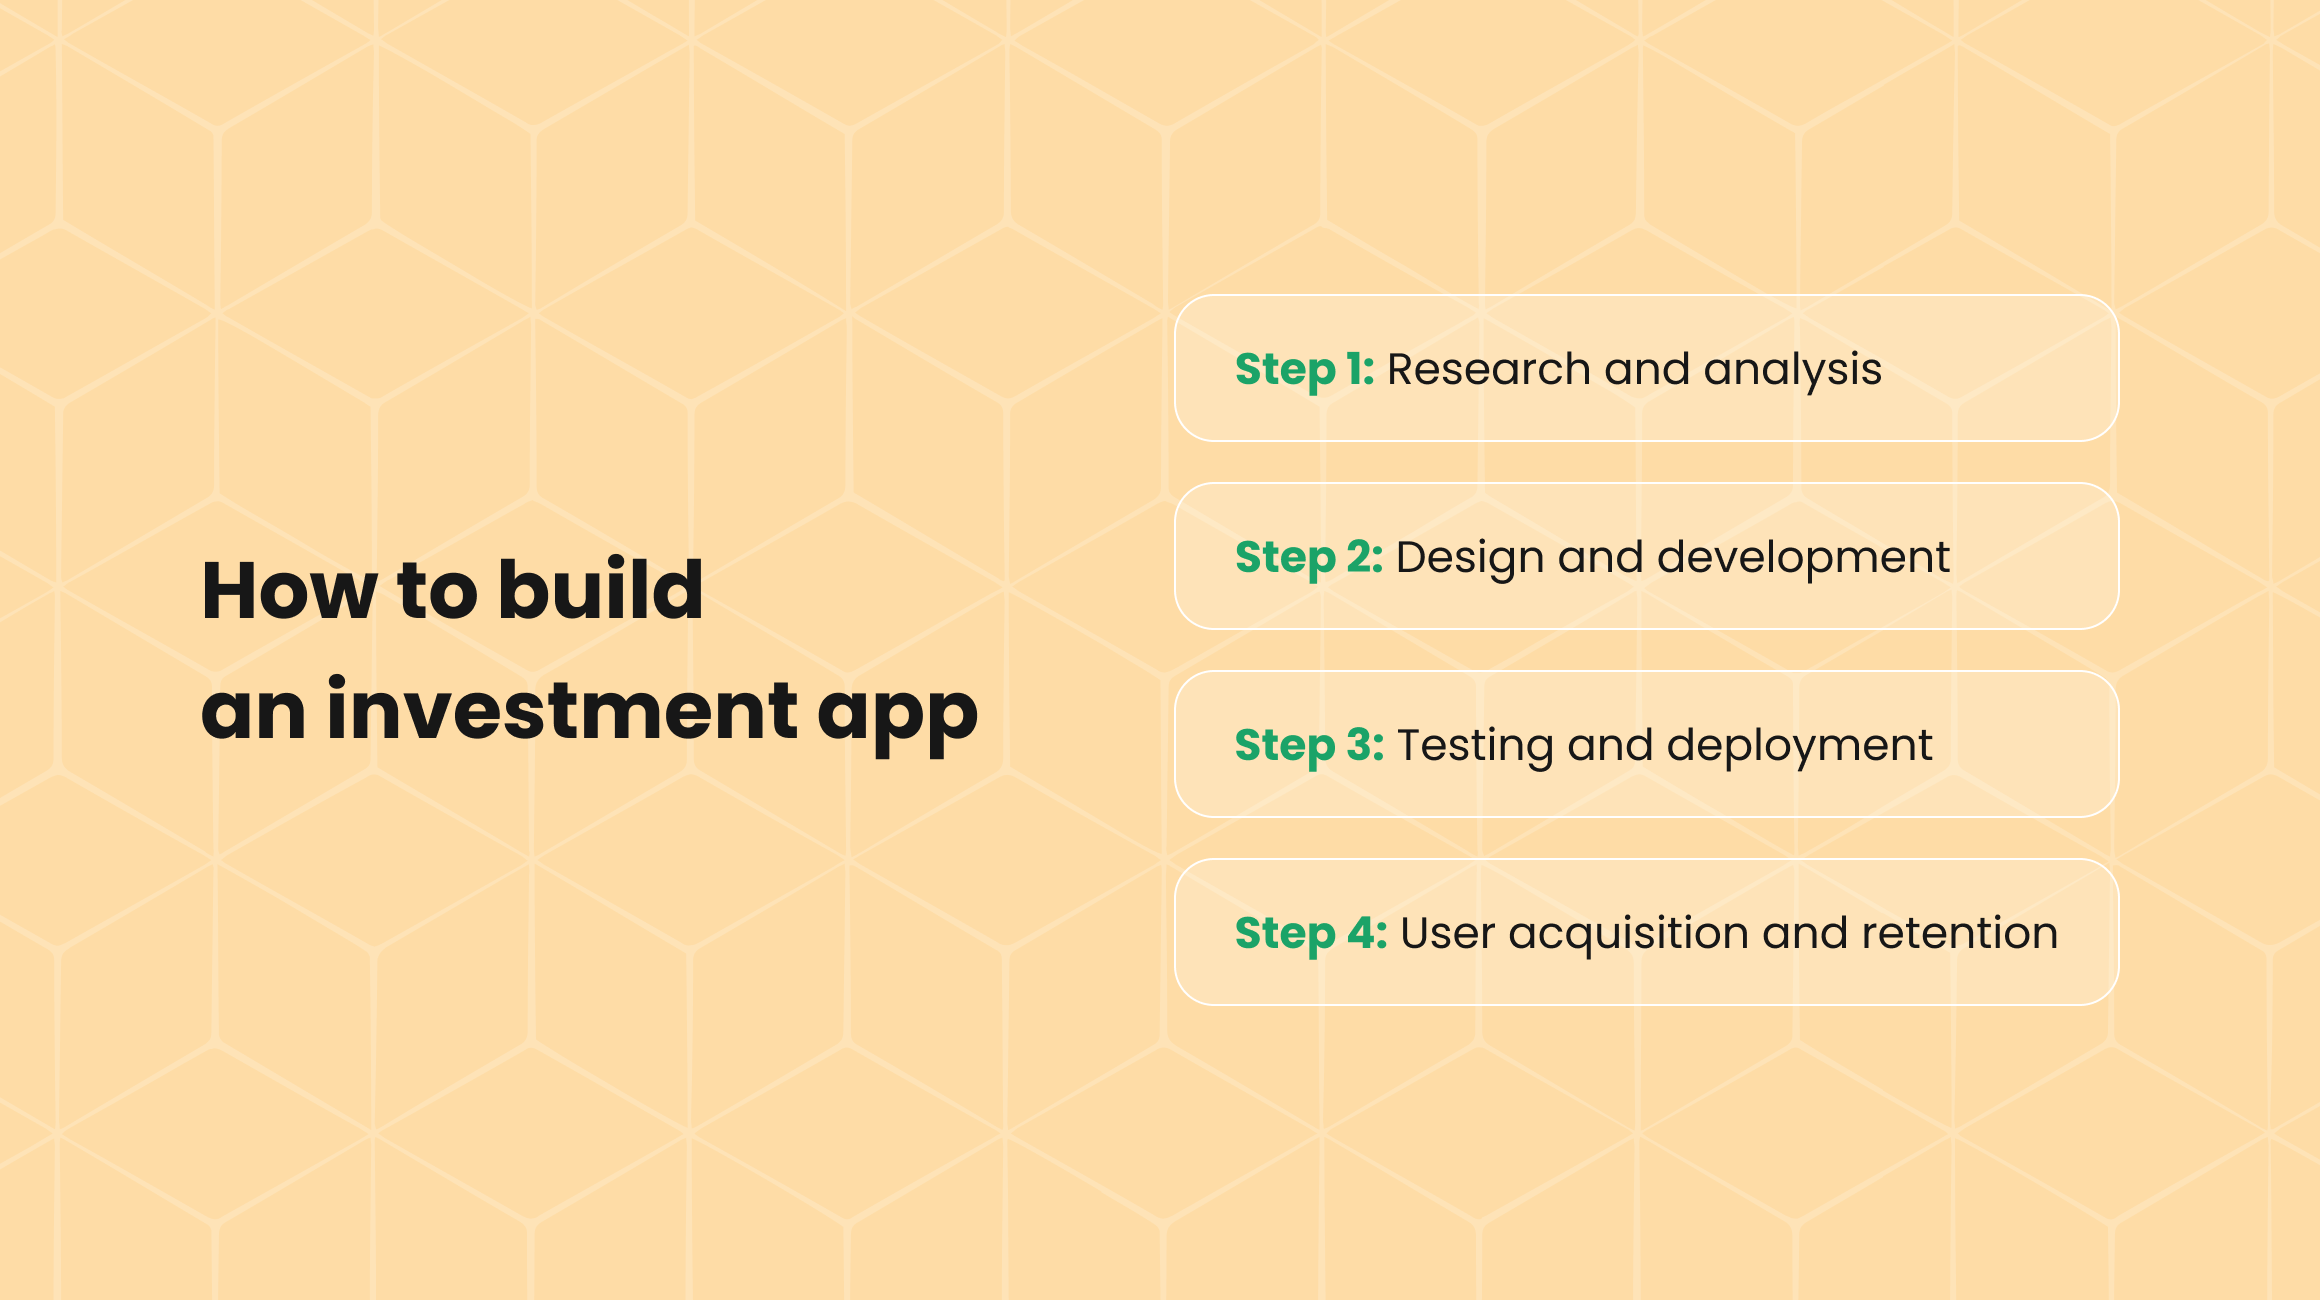 How to build an investment app in 4 steps